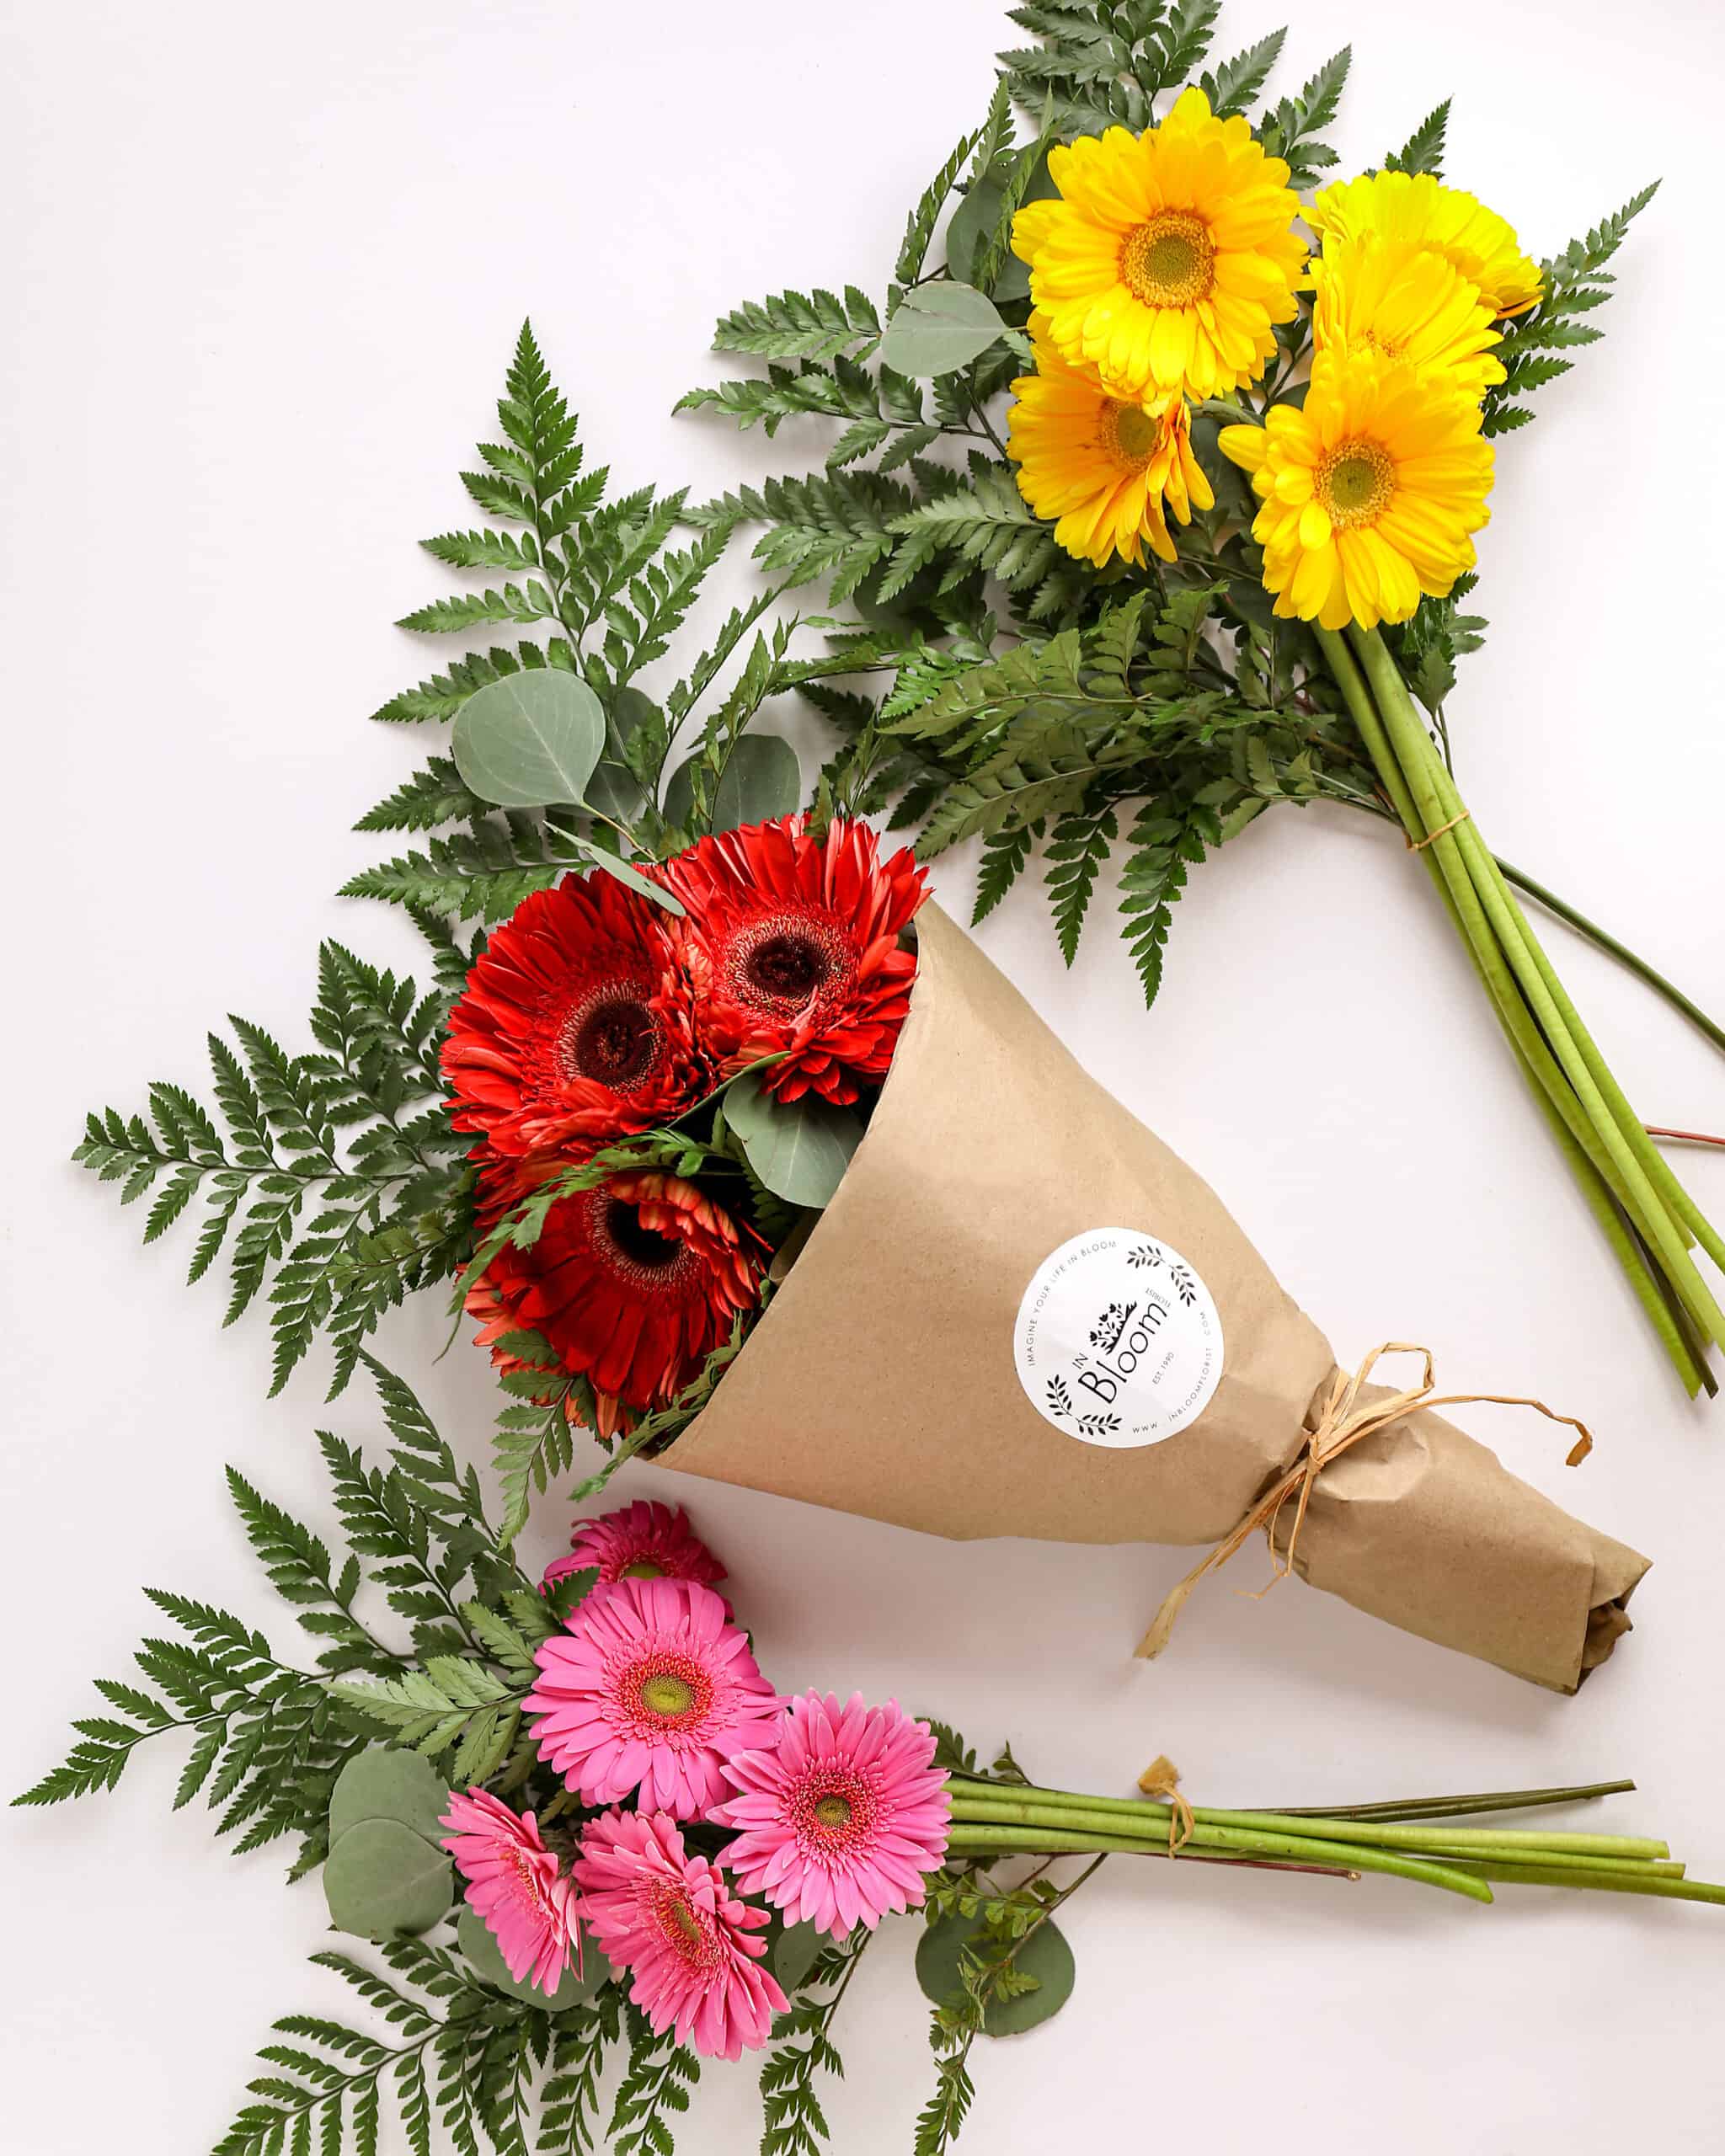  3 bouquets of gerbera daisies from In Bloom florist